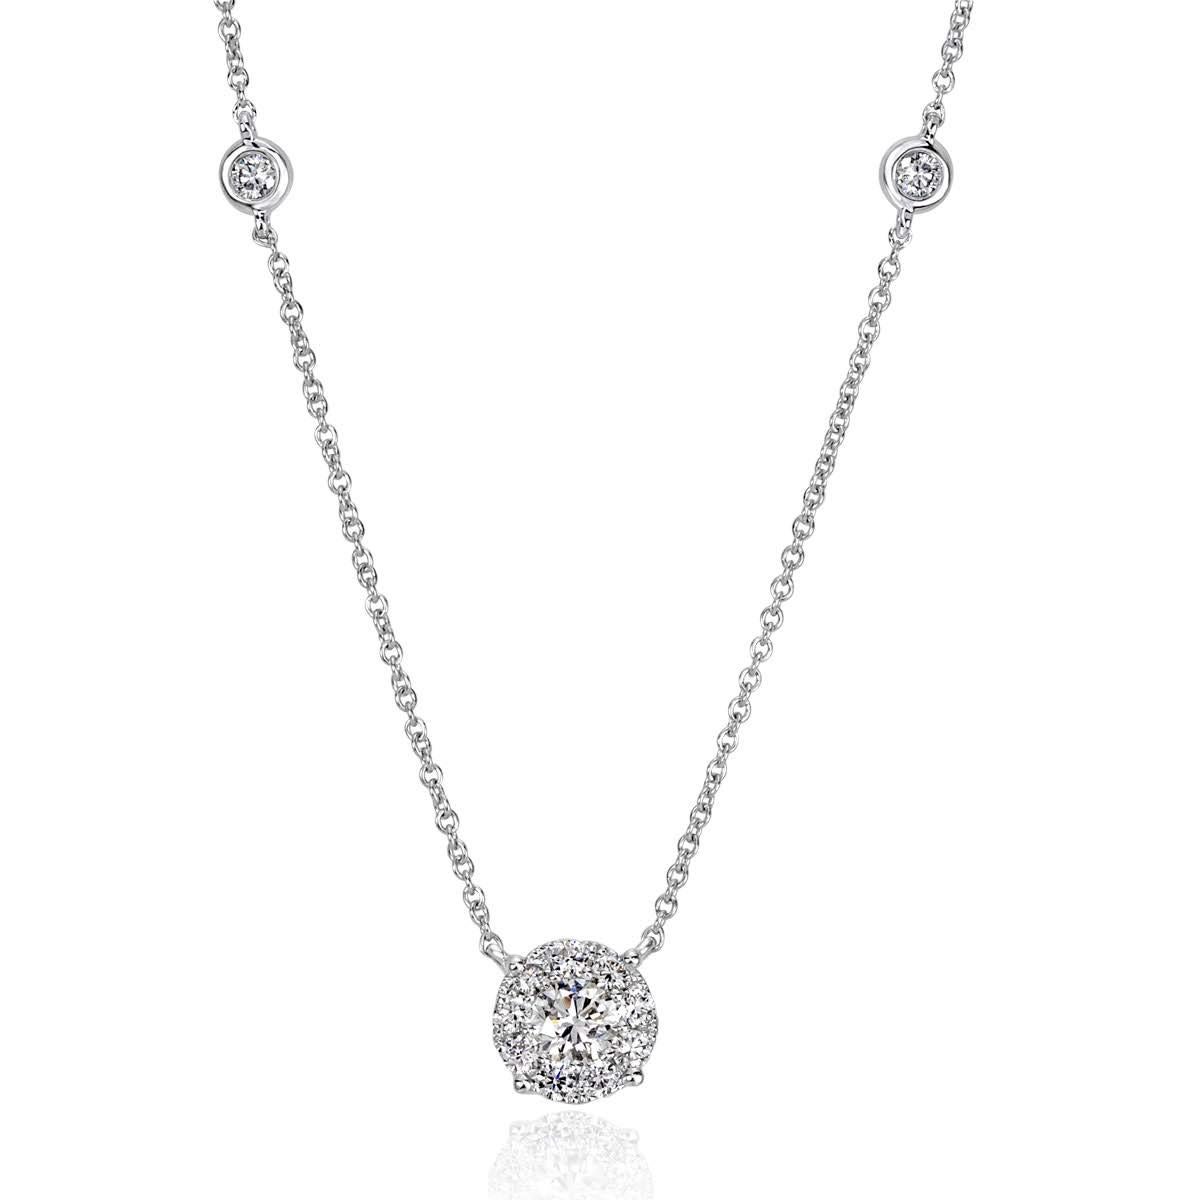 Custom created in 14k white gold, this lovely diamond pendant features 0.41ct of round brilliant cut diamonds. A larger round diamond is set at the center and surrounded by a shimmering halo of smaller diamonds. The diamonds are graded at E-F,